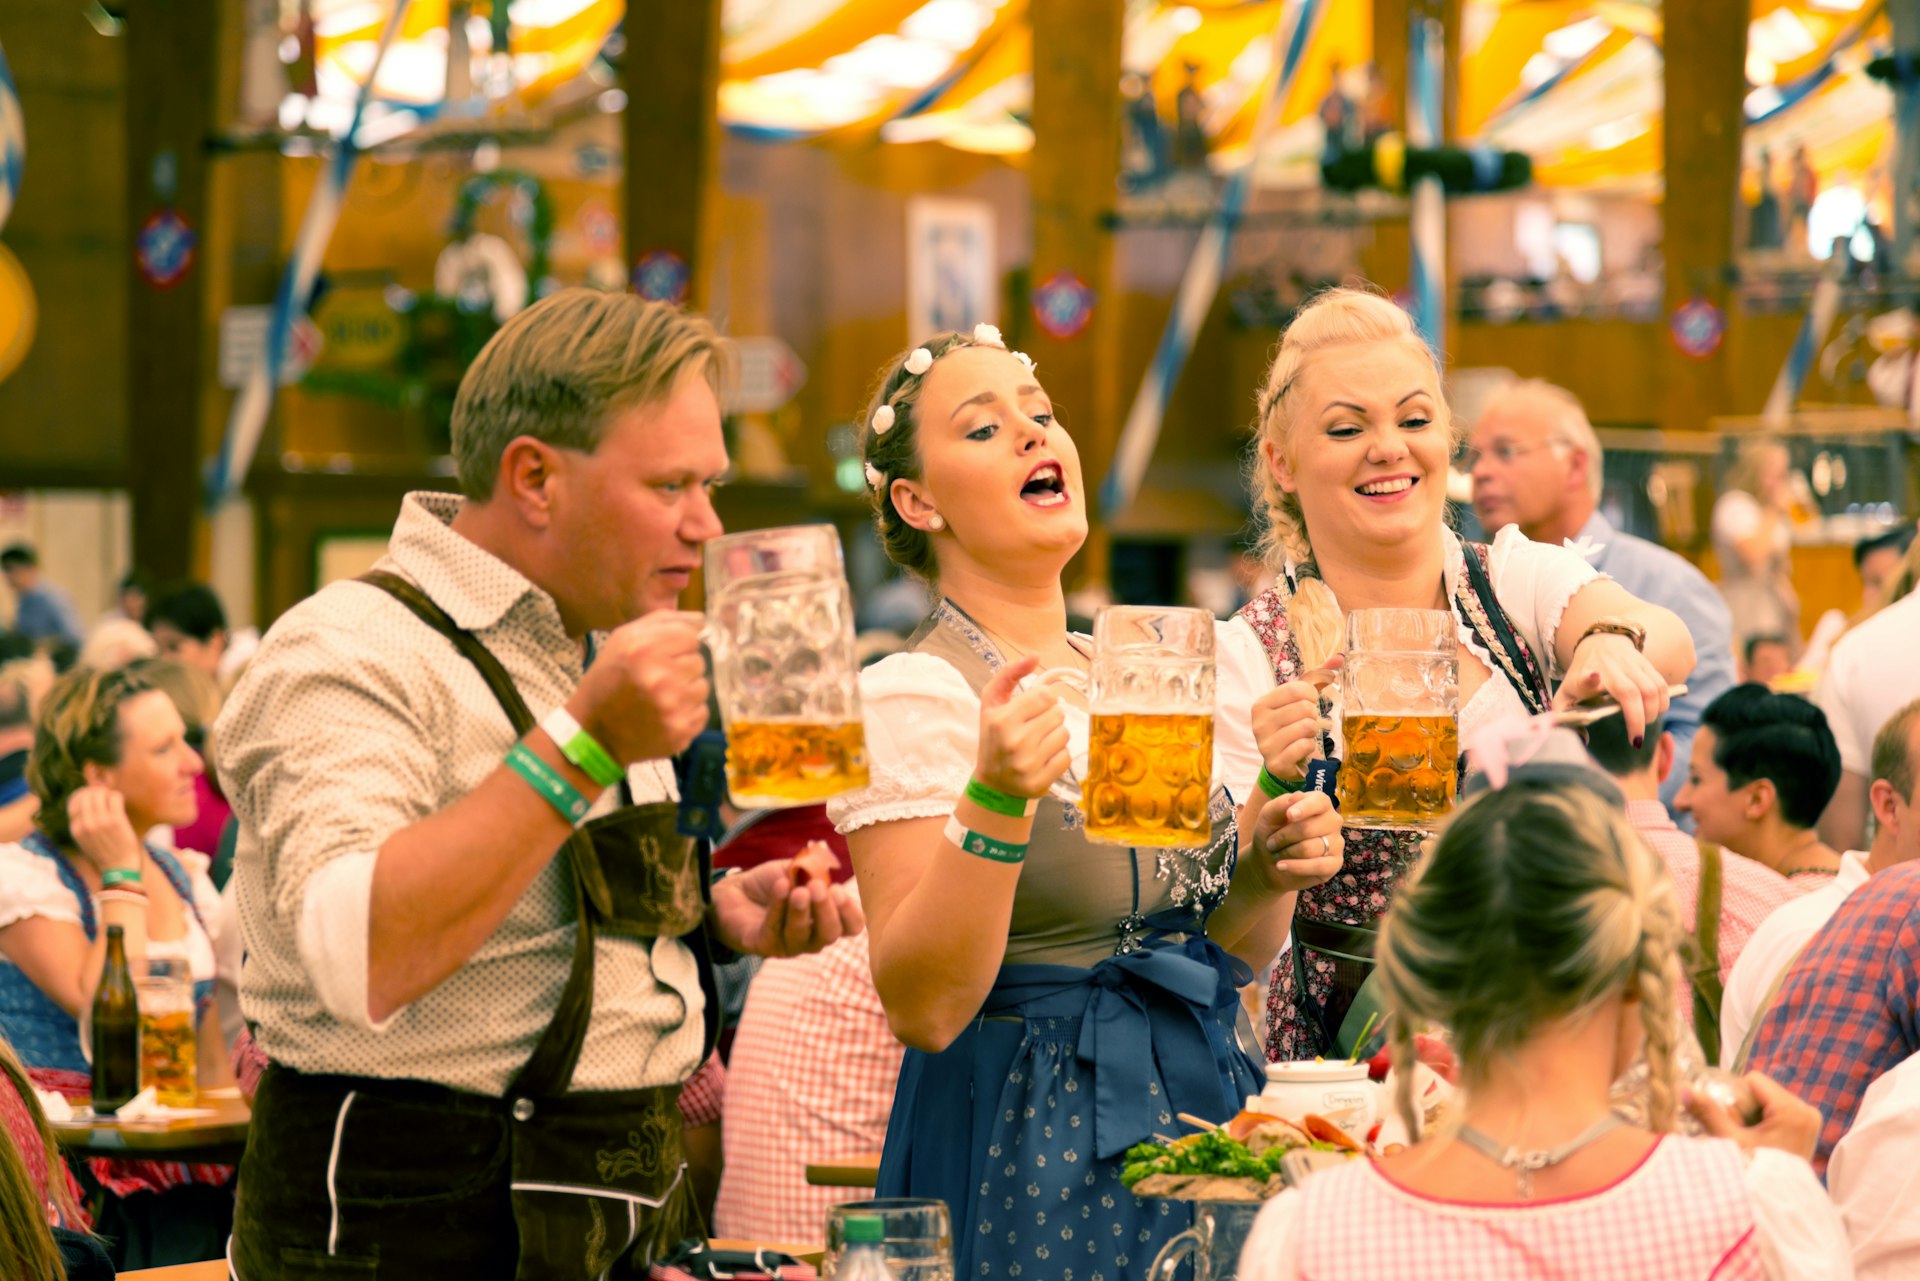 'Prost' is how you say 'cheers' in German